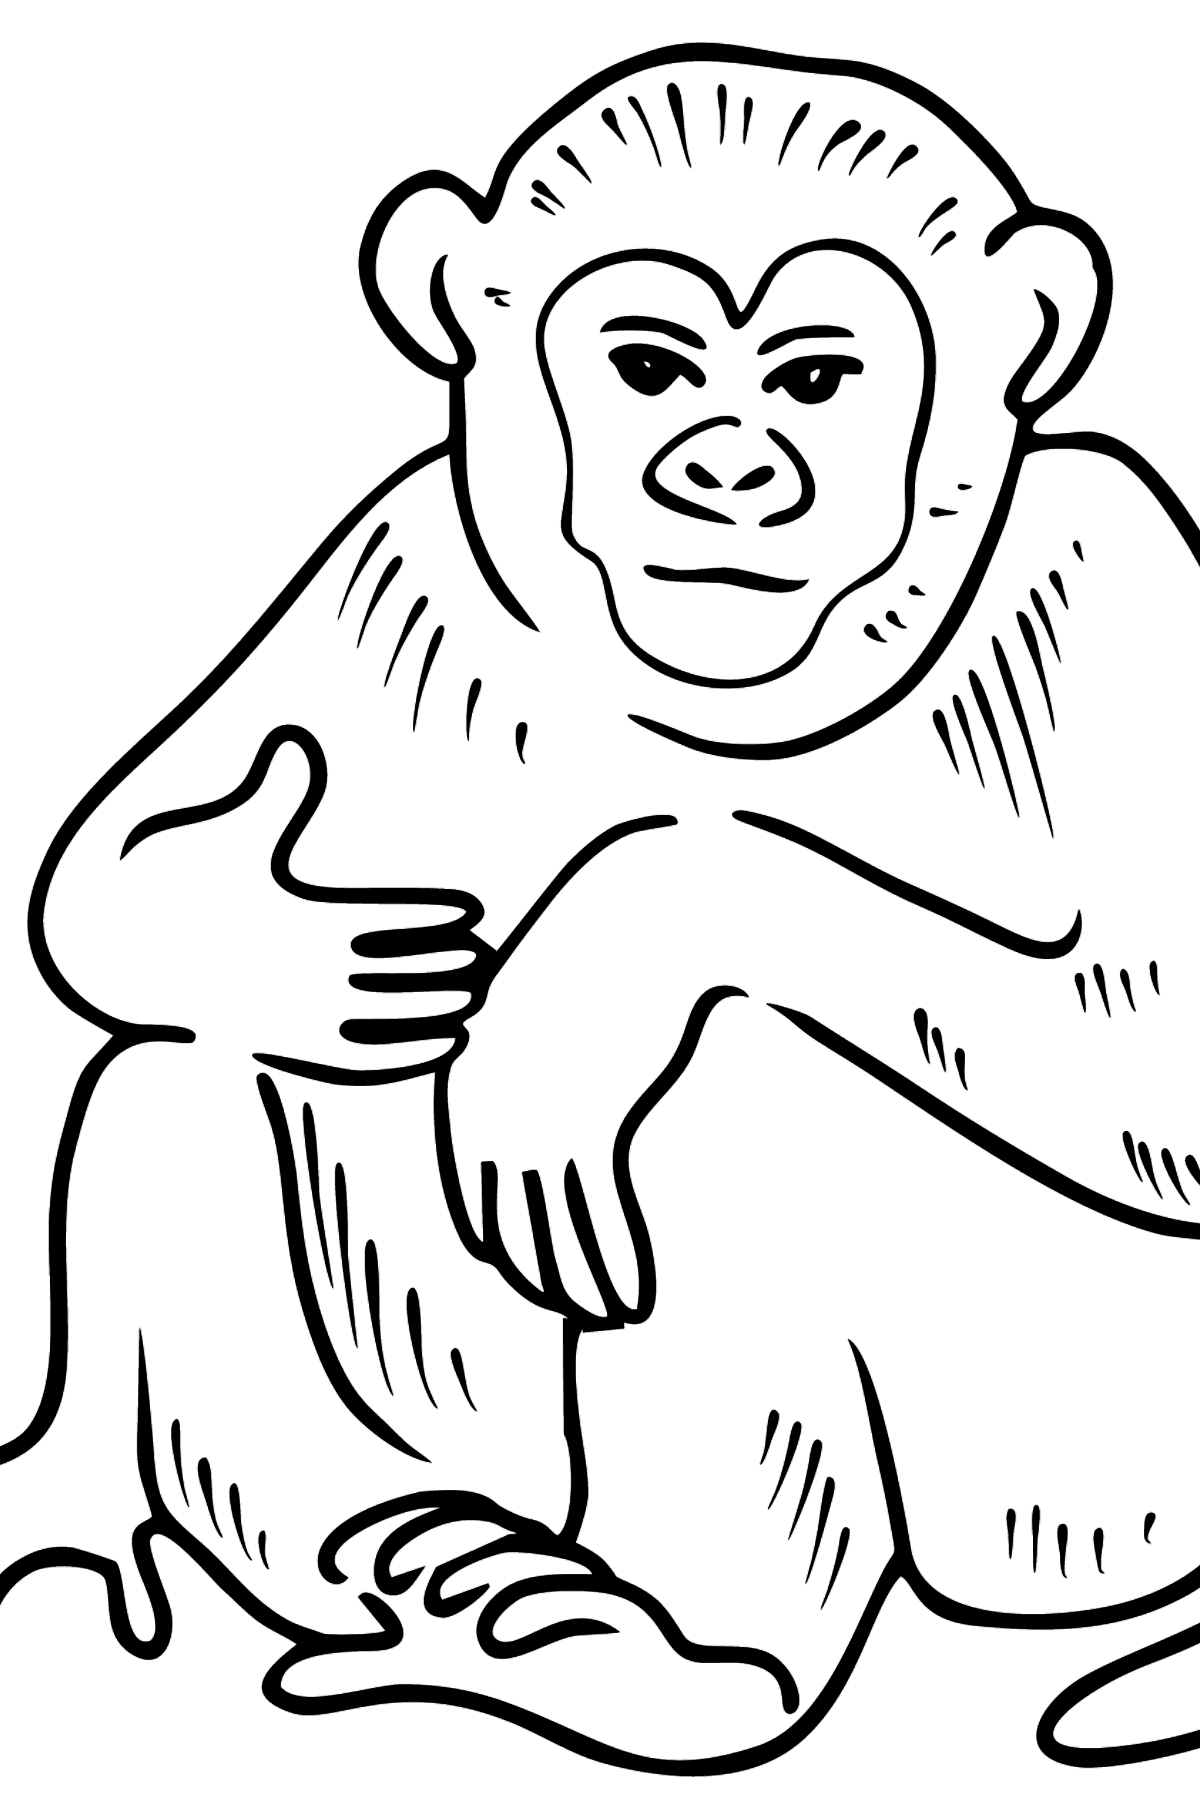 Monkey coloring page - Coloring Pages for Kids